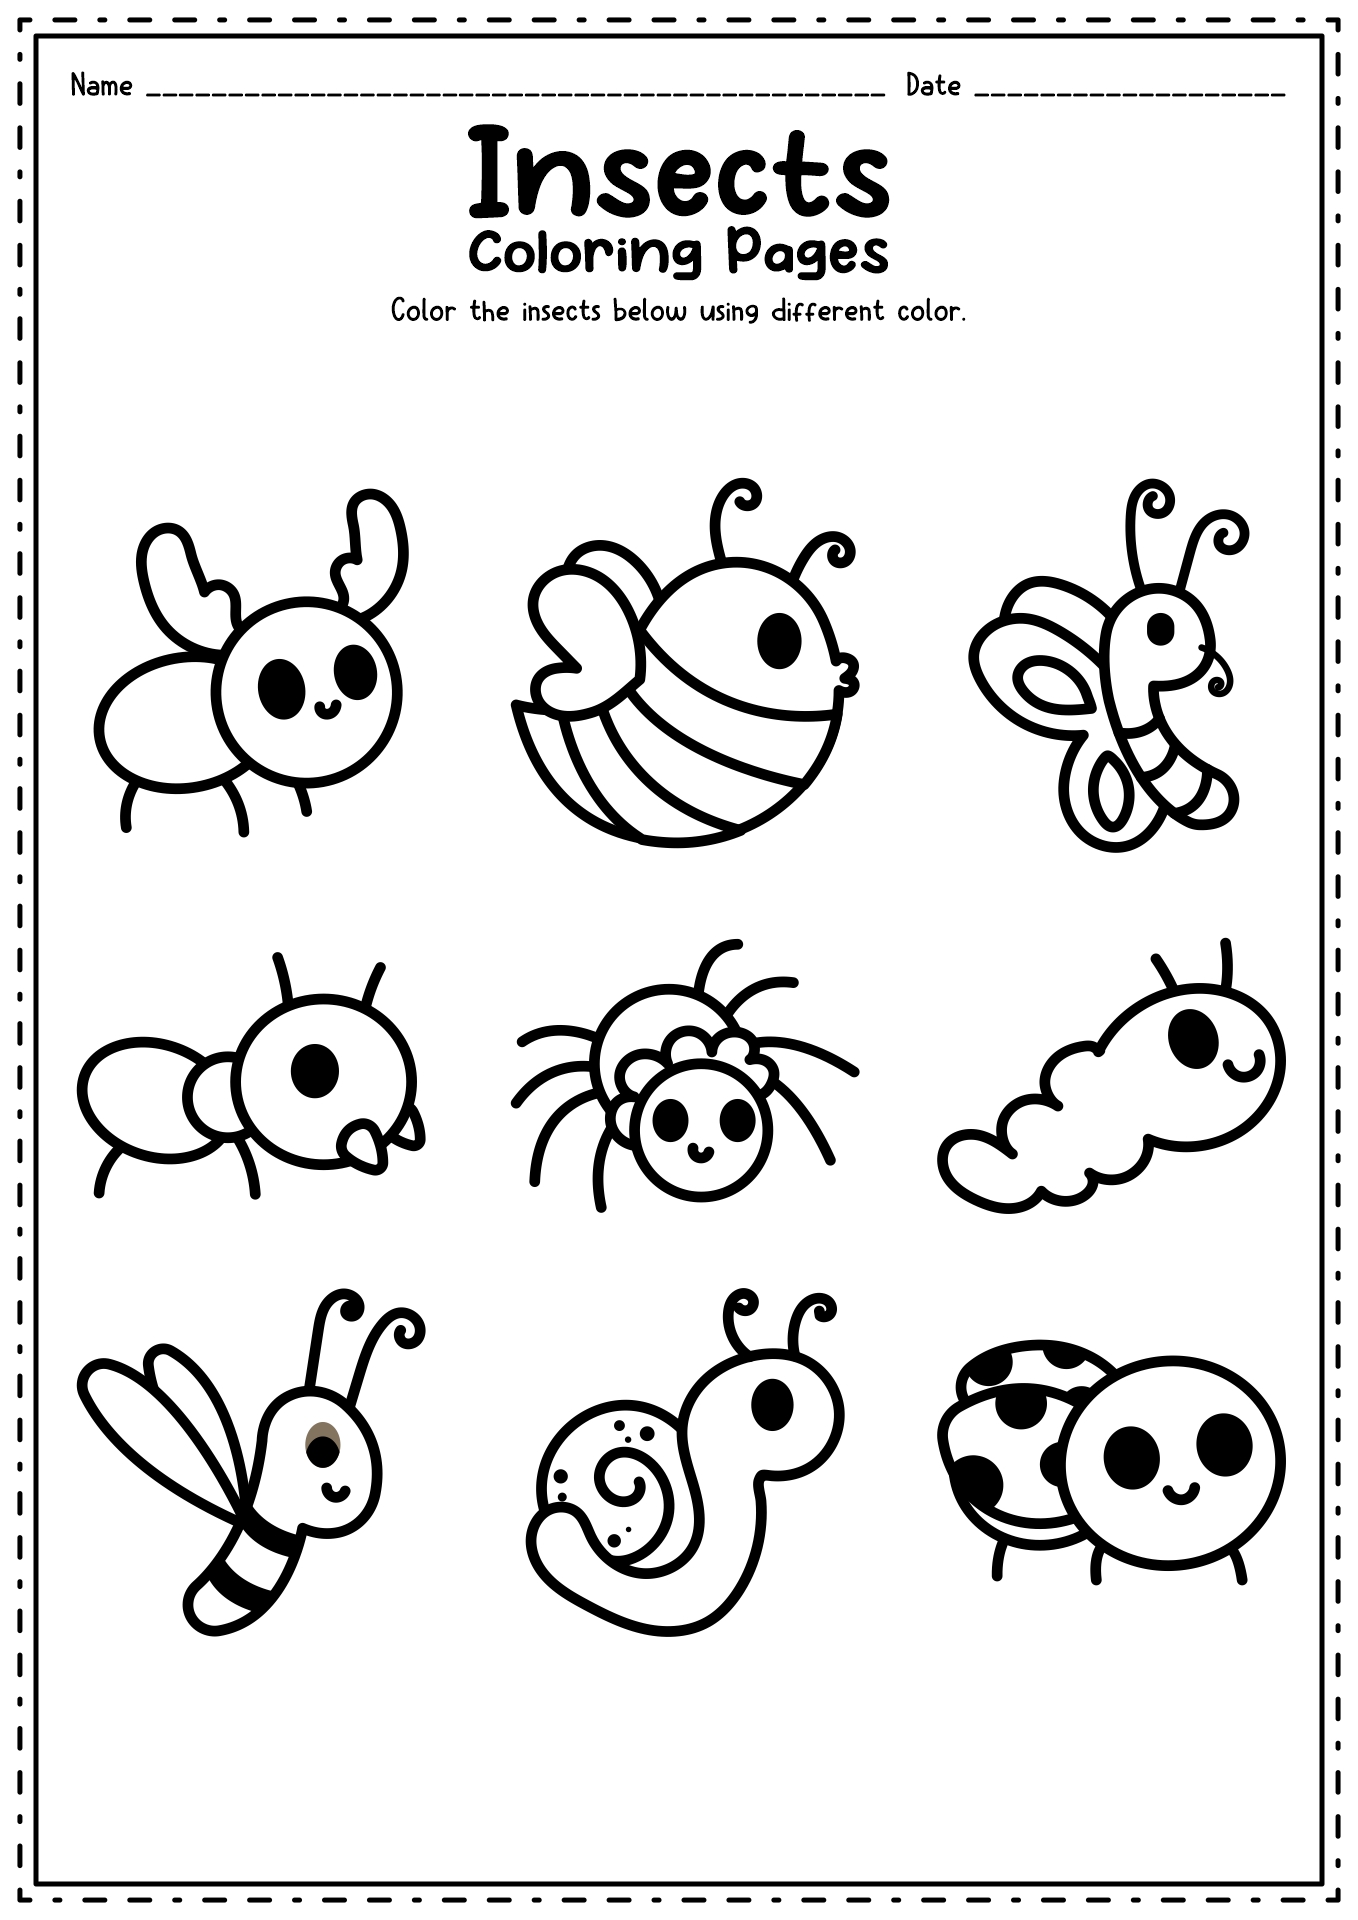 7-best-images-of-kids-bug-and-insects-worksheets-insect-for-kids-to-color-diagram-of-insect